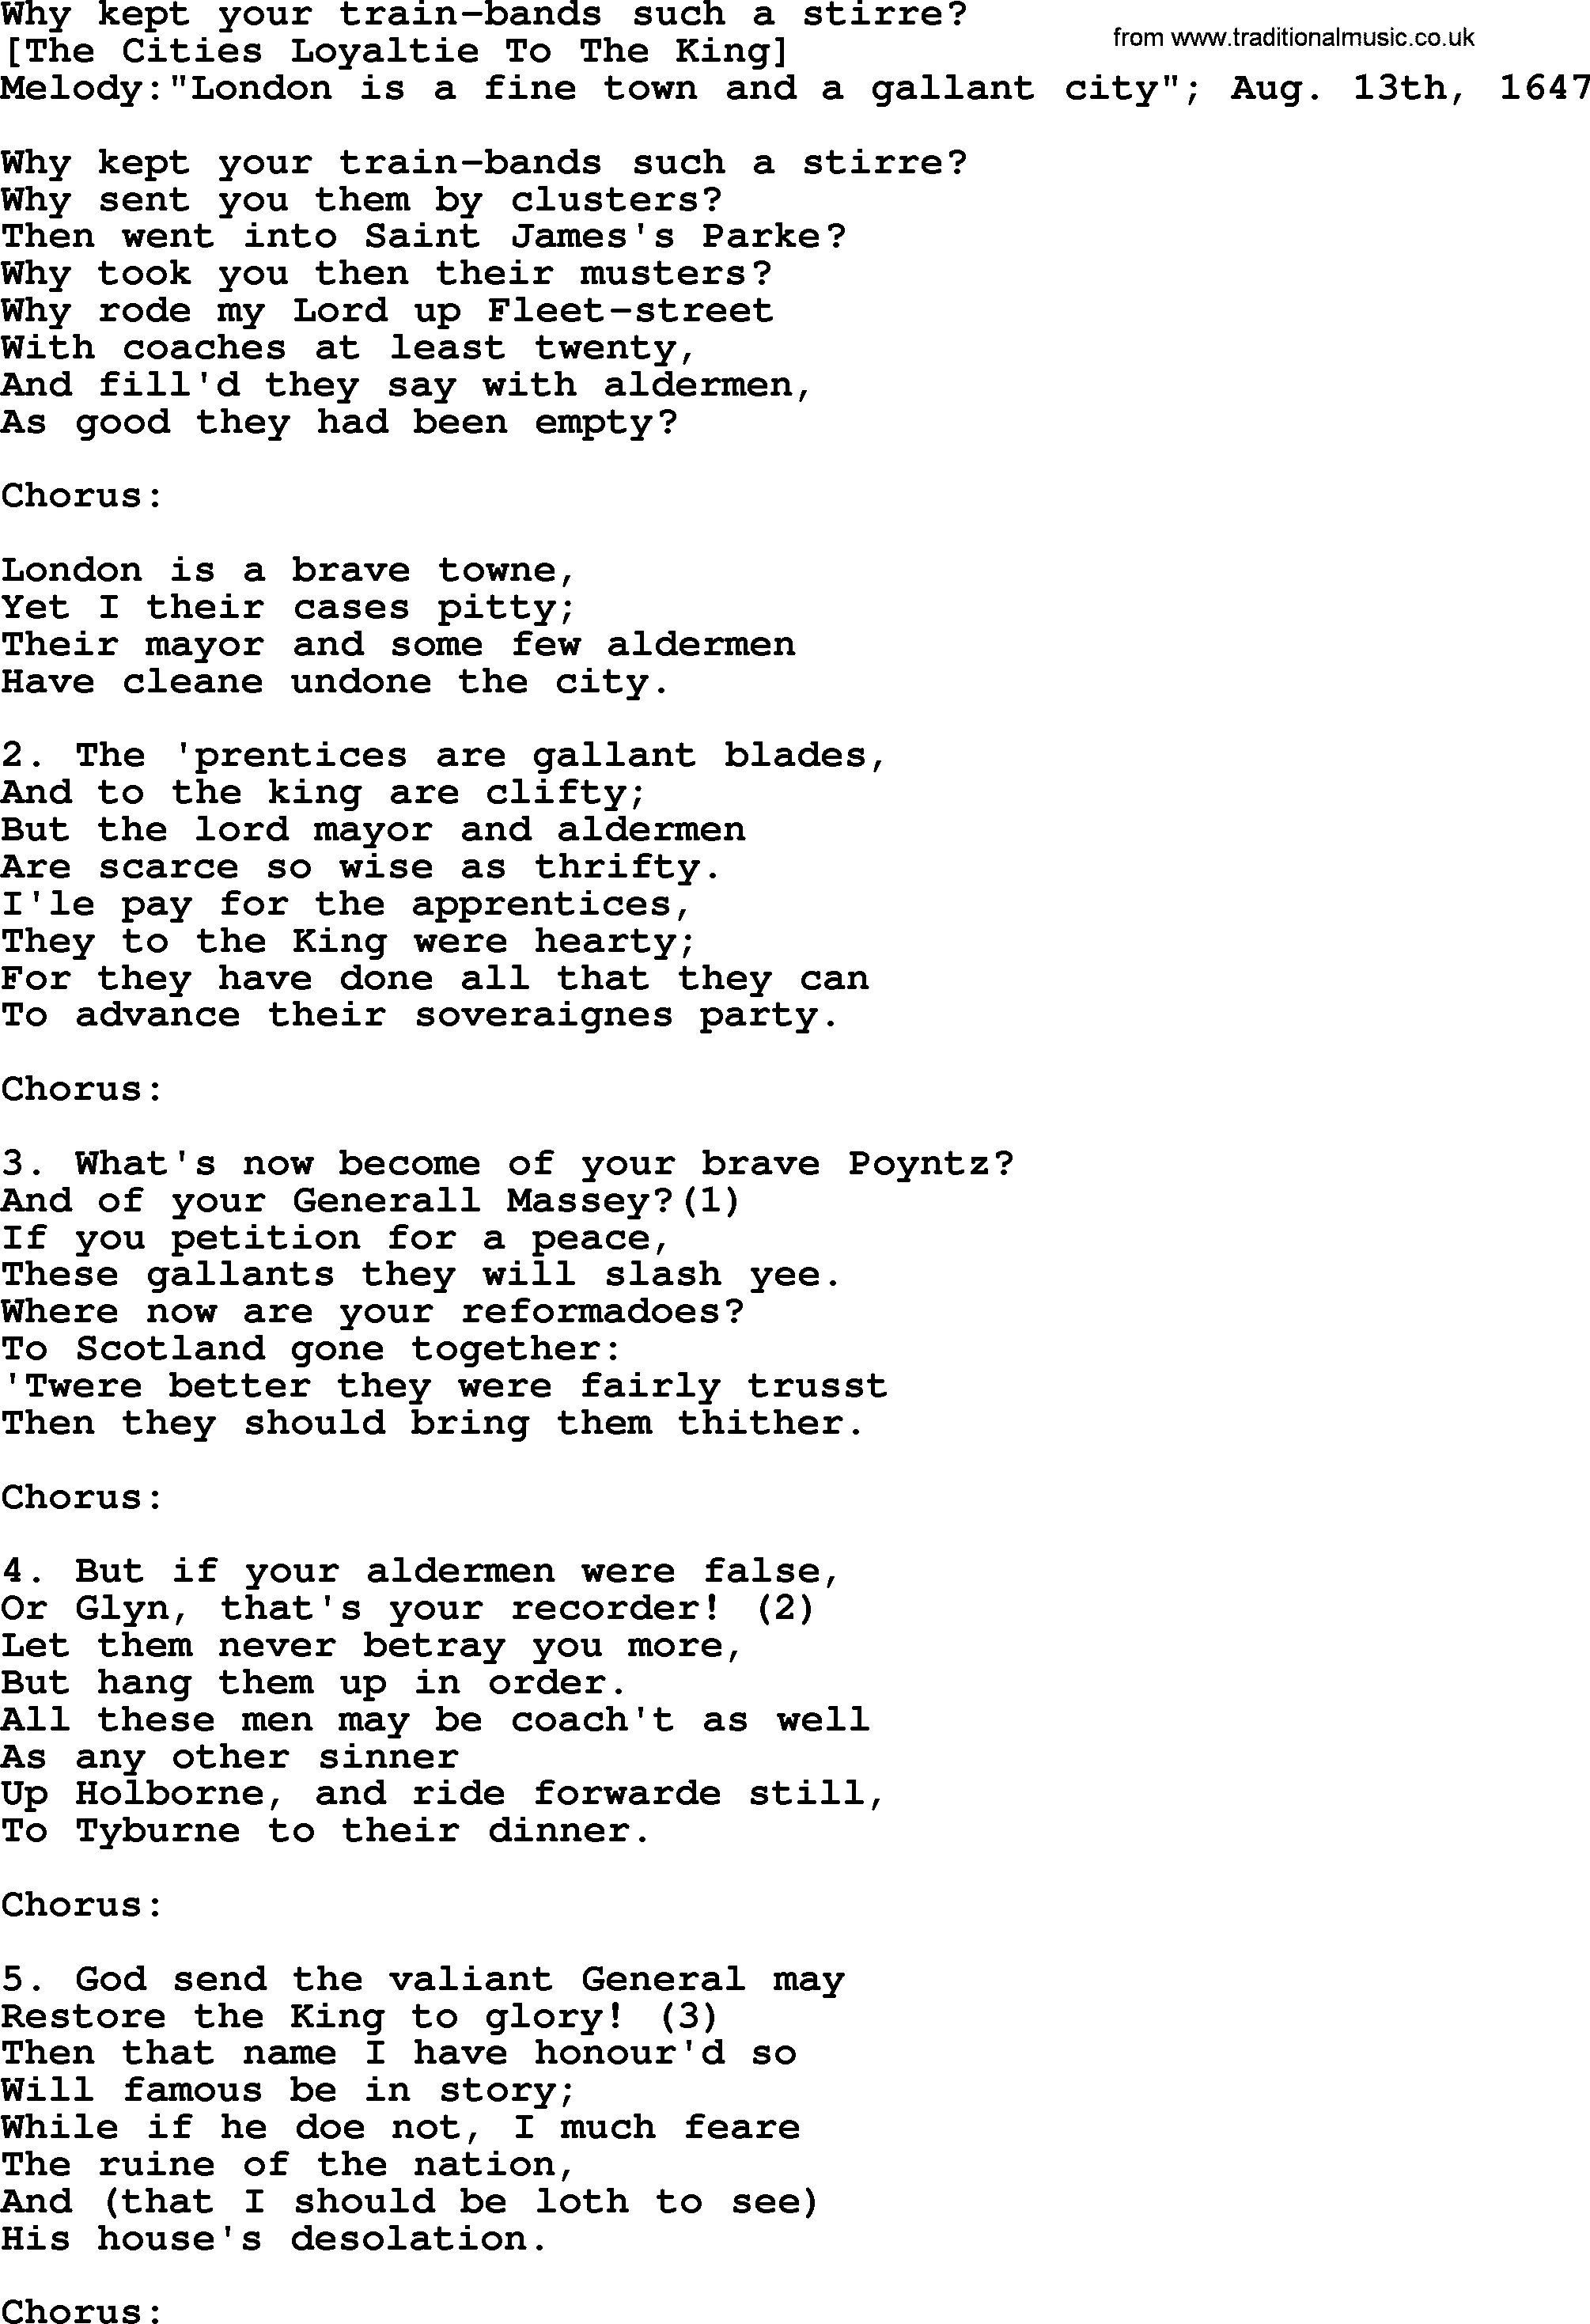 Old English Song: Why Kept Your Train-Bands Such A Stirre lyrics